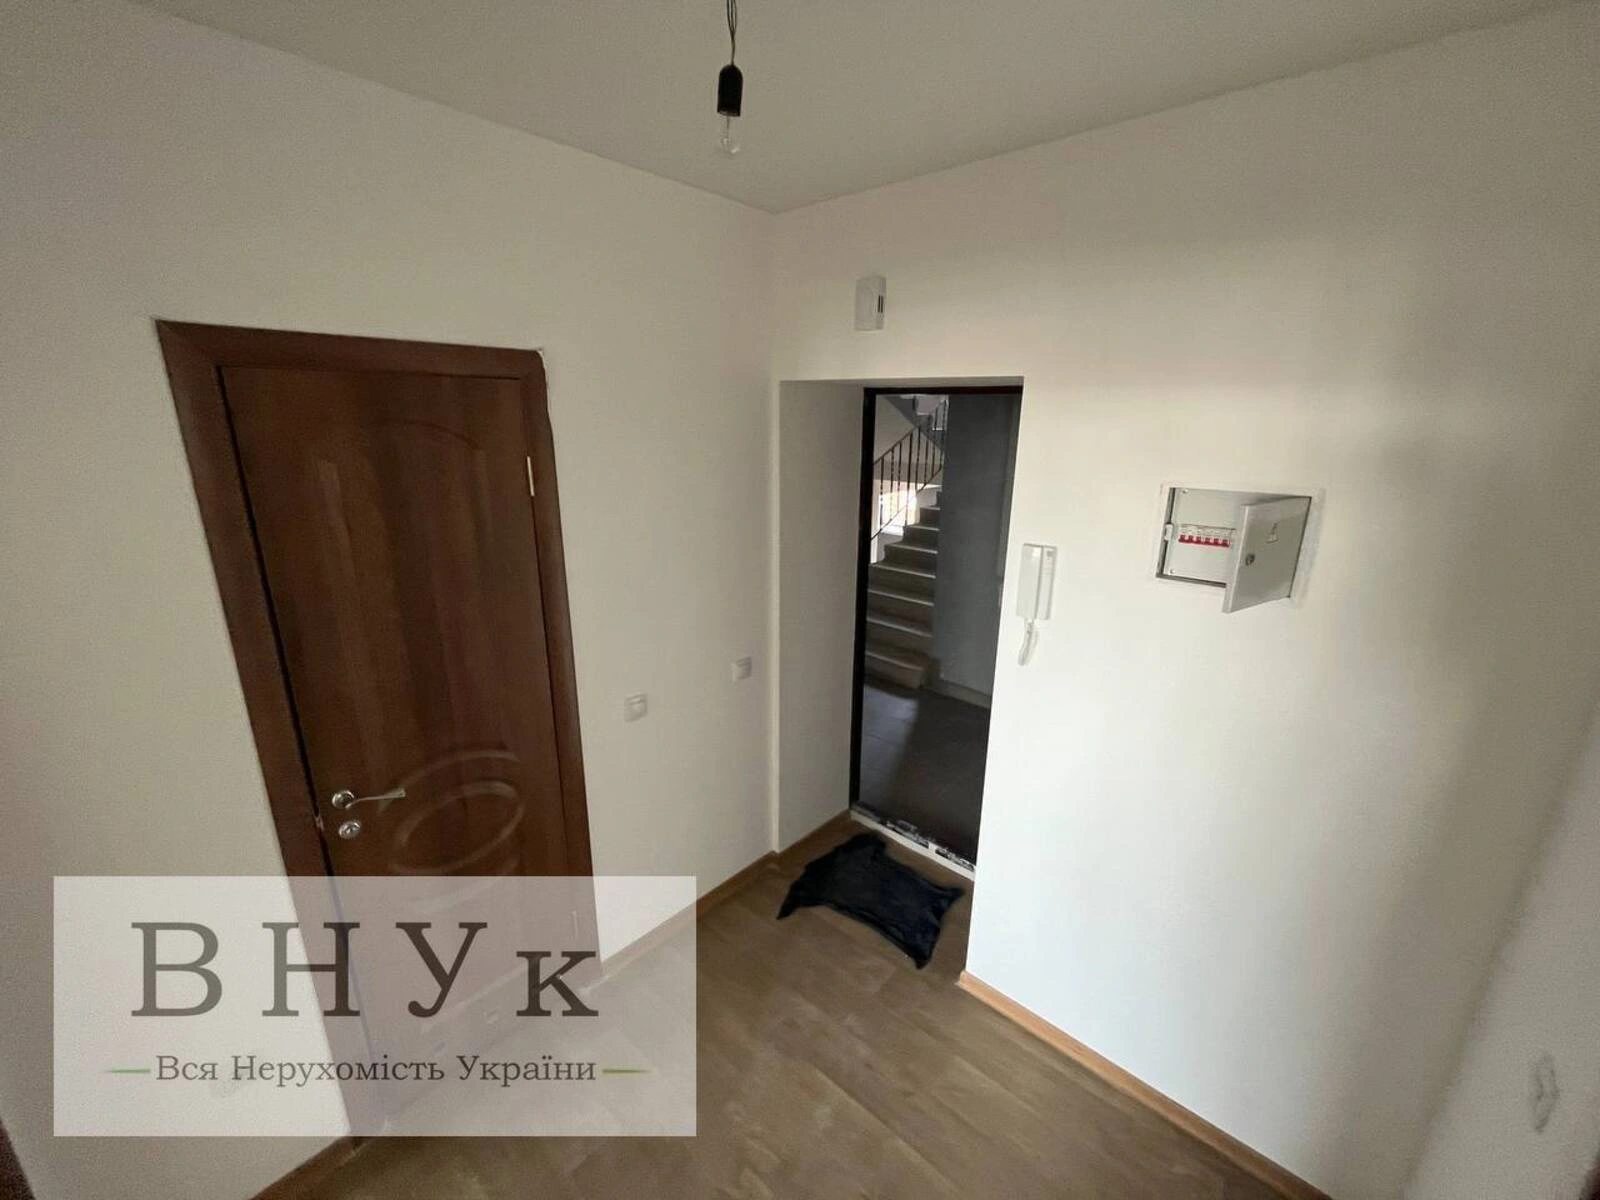 Apartments for sale. 1 room, 41 m², 9th floor/9 floors. Smakuly vul., Ternopil. 